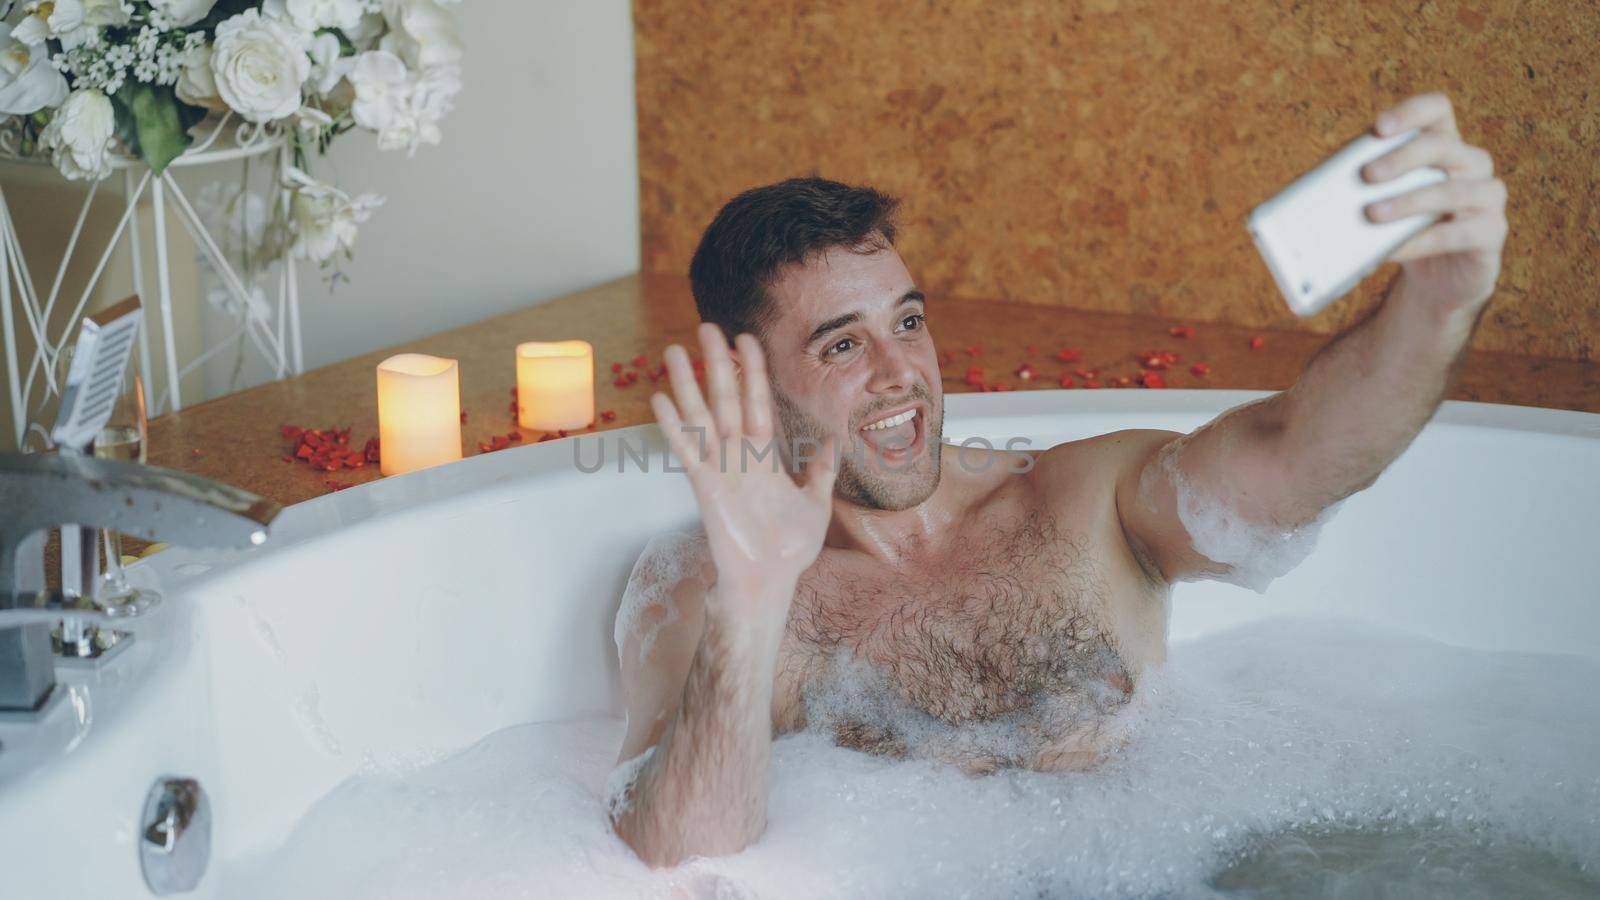 Young handsome man popular blogger is recording video in hot tub in day spa using smartphone. Burning candles, champagne glass and flowers are visible. by silverkblack